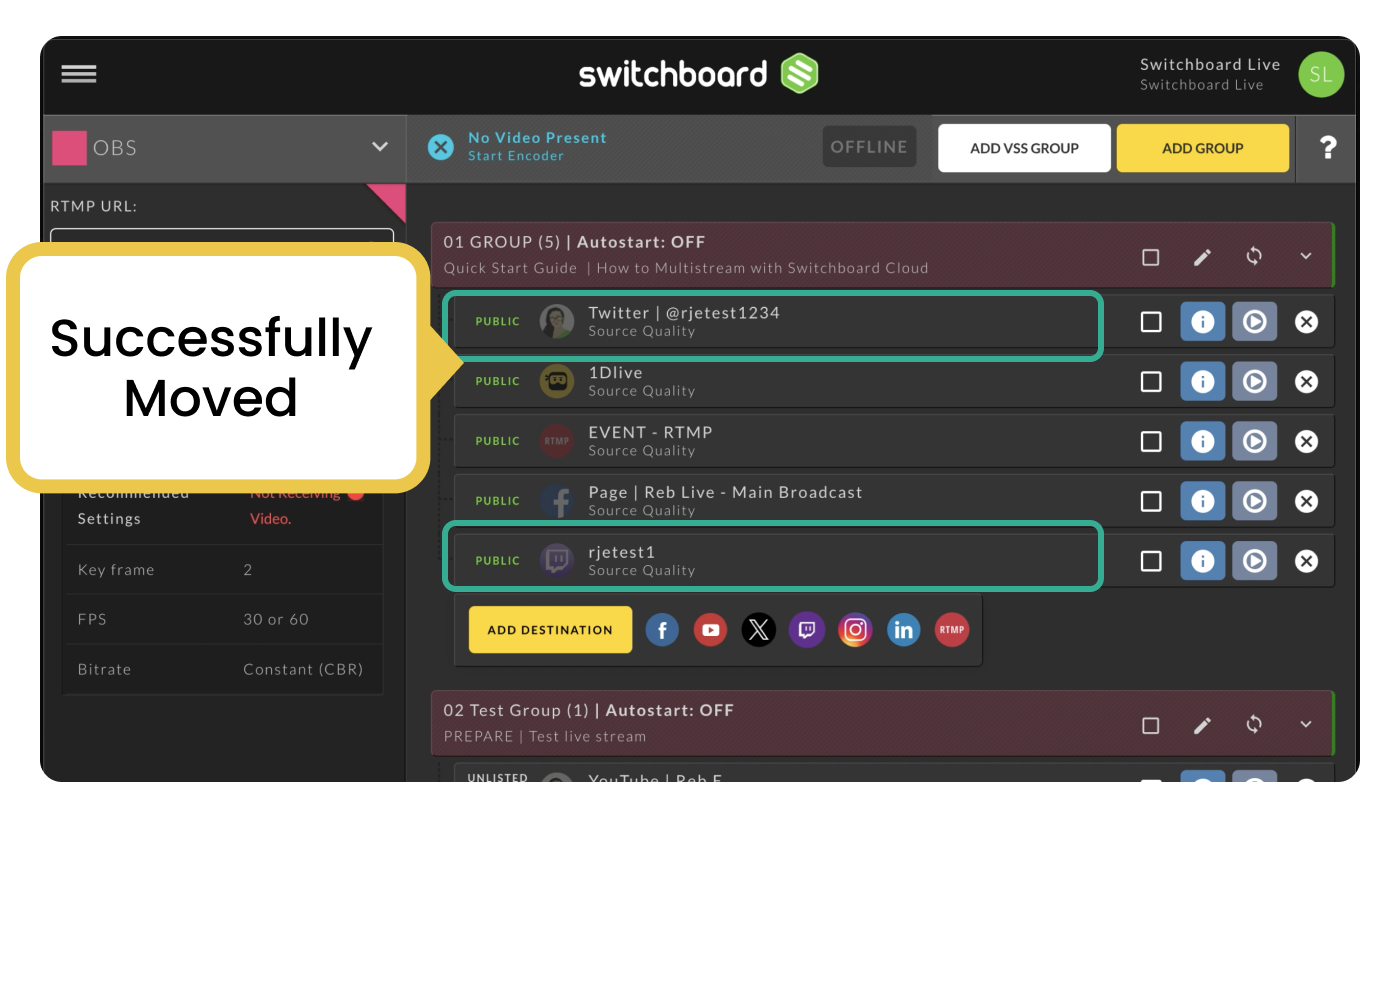 Movedestination-btwn-workflows-switchboardlive-howto 11.png